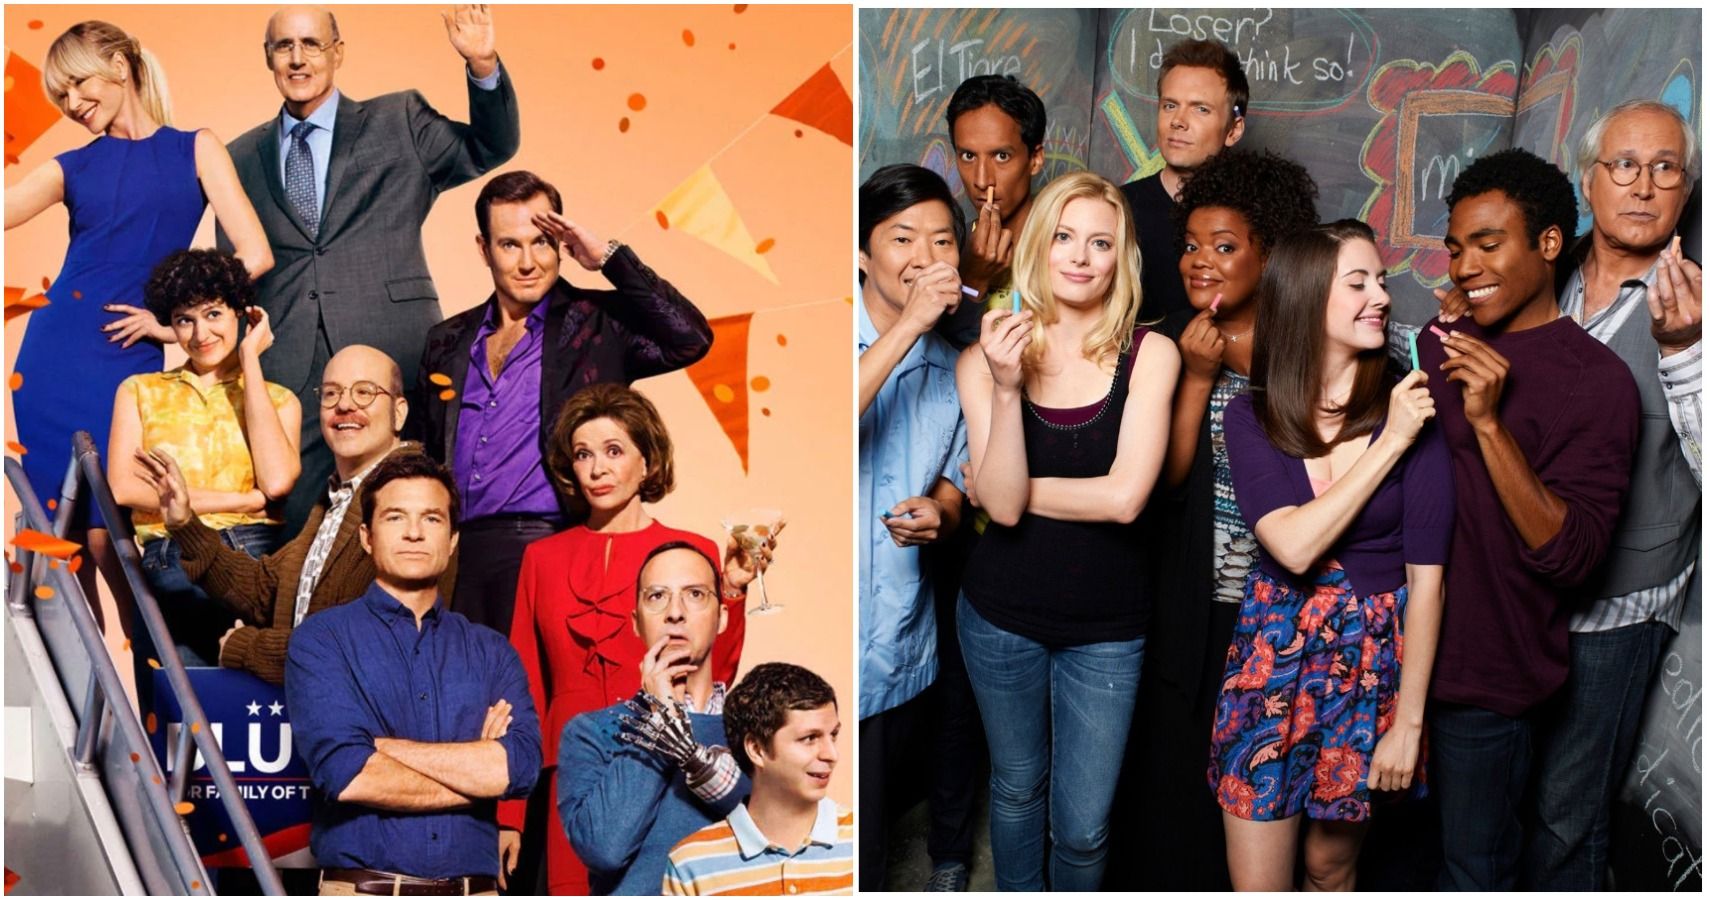 Why Arrested Development Is The Best Comedy Series Ever (& 5 Reasons Community Is Even Funnier)